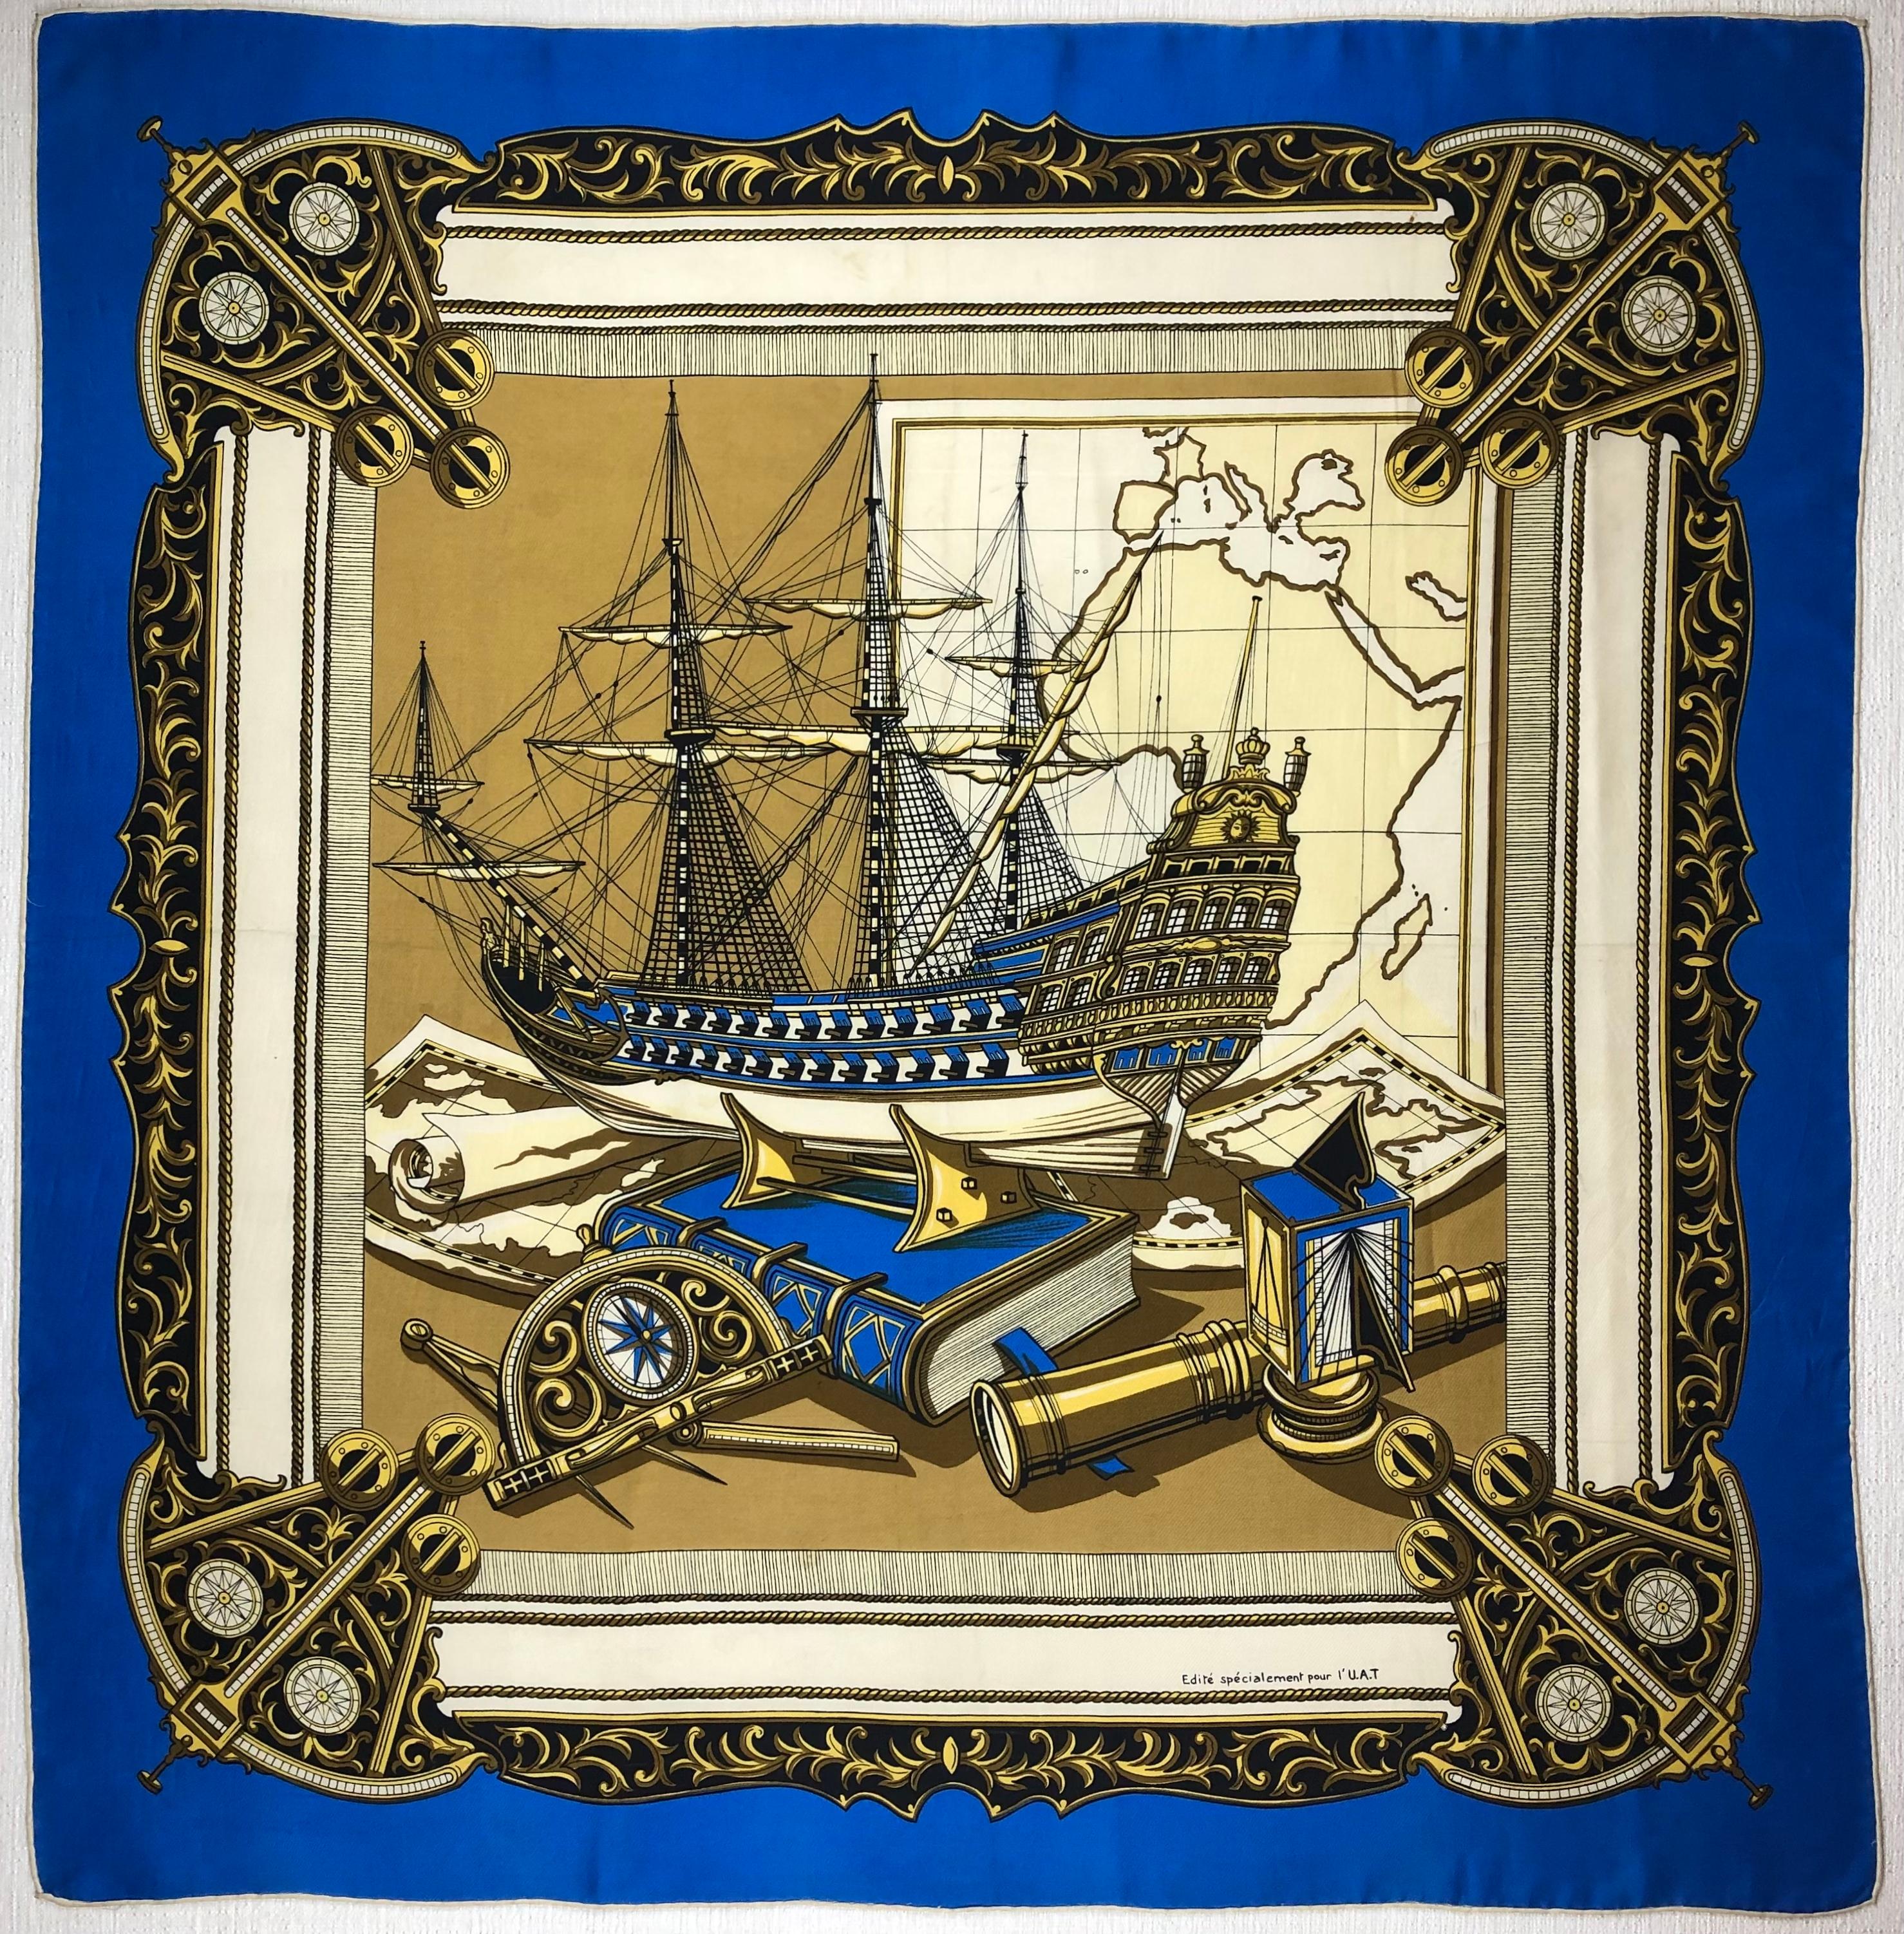 An eye catching classic Hermes silk scarf shown in an elegant custom gilt wood frame. Makes a graphic luxurious piece of art.

The scarf is in perfect condition, it appears wrinkled because to prevent glare when being photographed, the frame shown